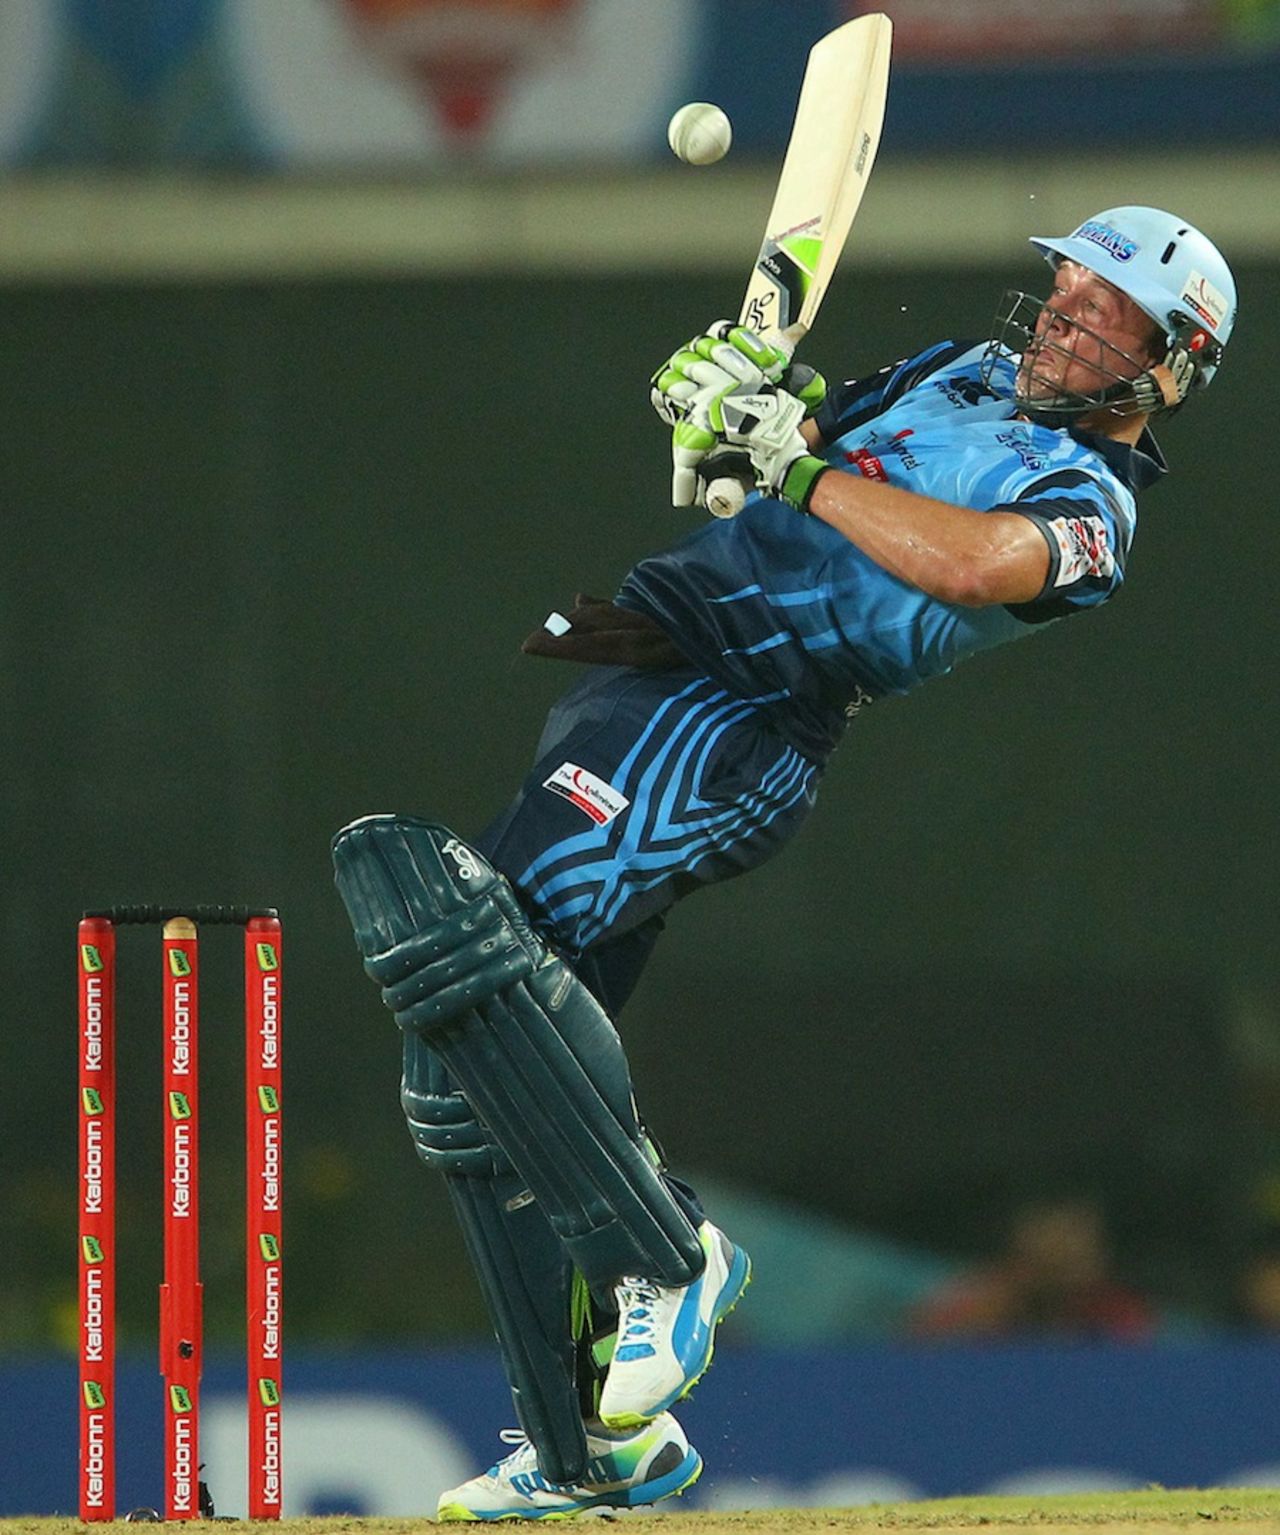 The whole gamut of AB de Villiers' shot-making skills was on show, Chennai Super Kings v Titans, Champions League 2013, Group B, Ranchi, September 22, 2013